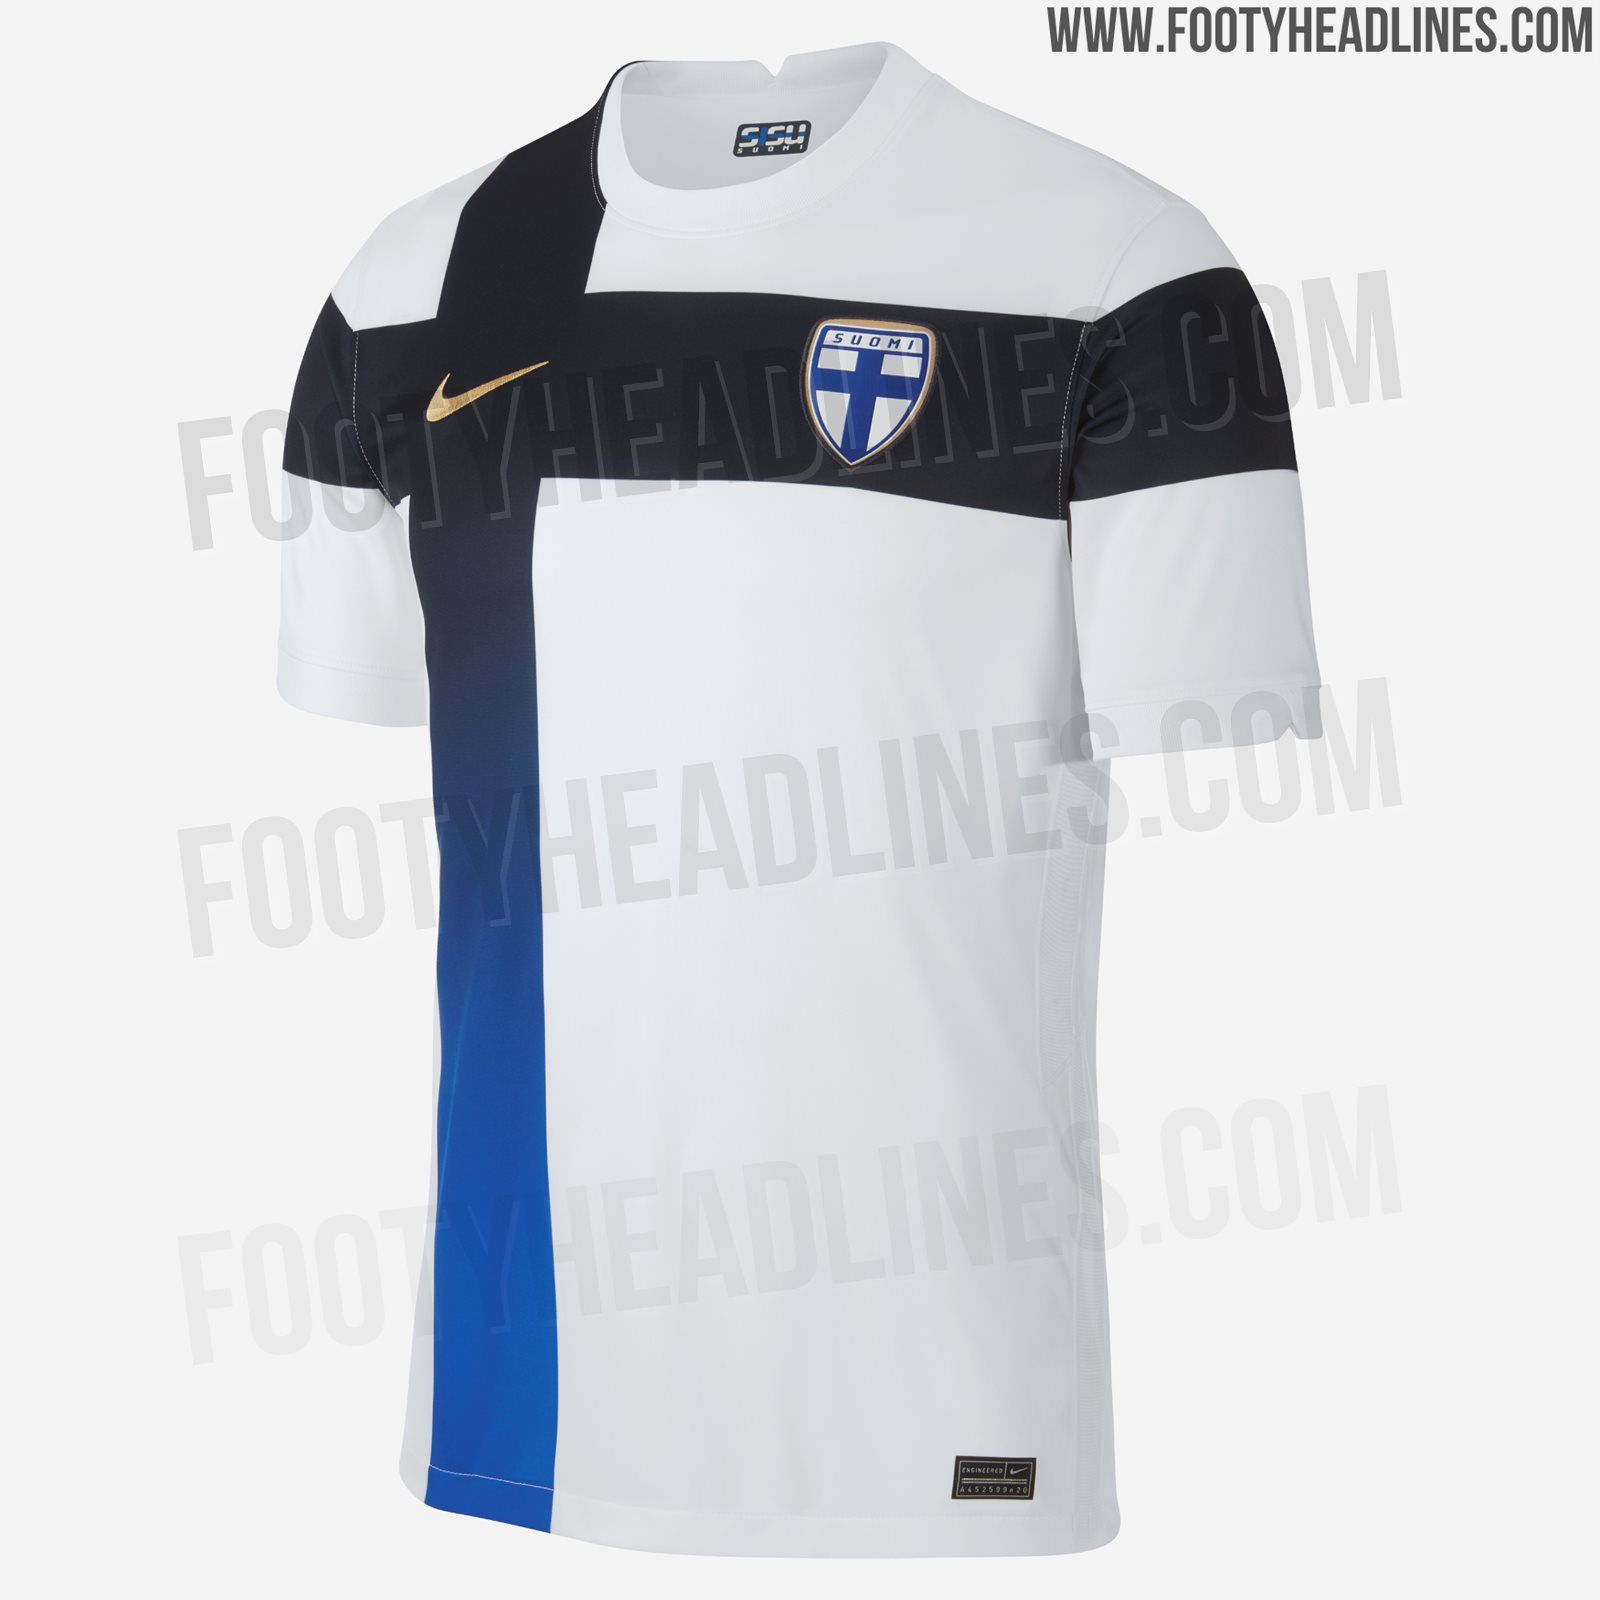 finland-2020-home-kit